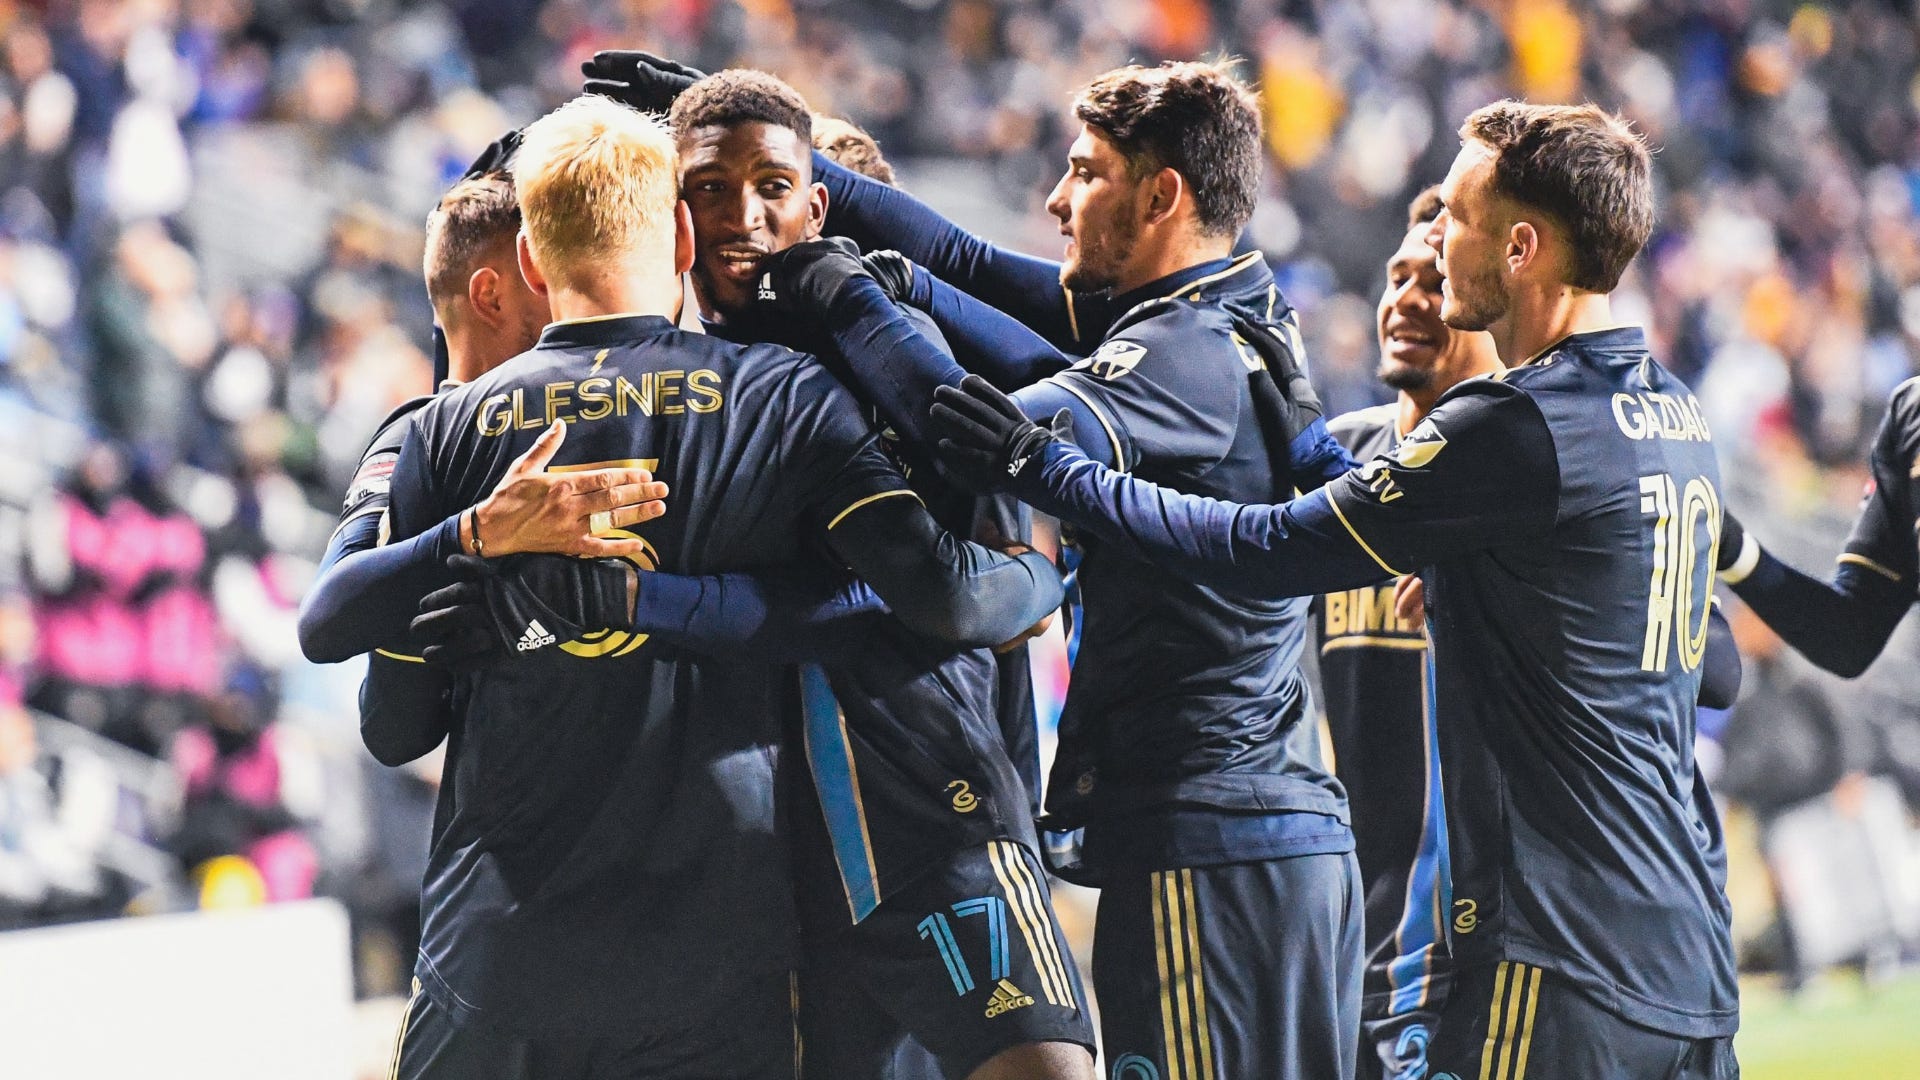 Atlas vs Philadelphia Union Where to watch the match online, live stream, TV channels and kick-off time Goal US